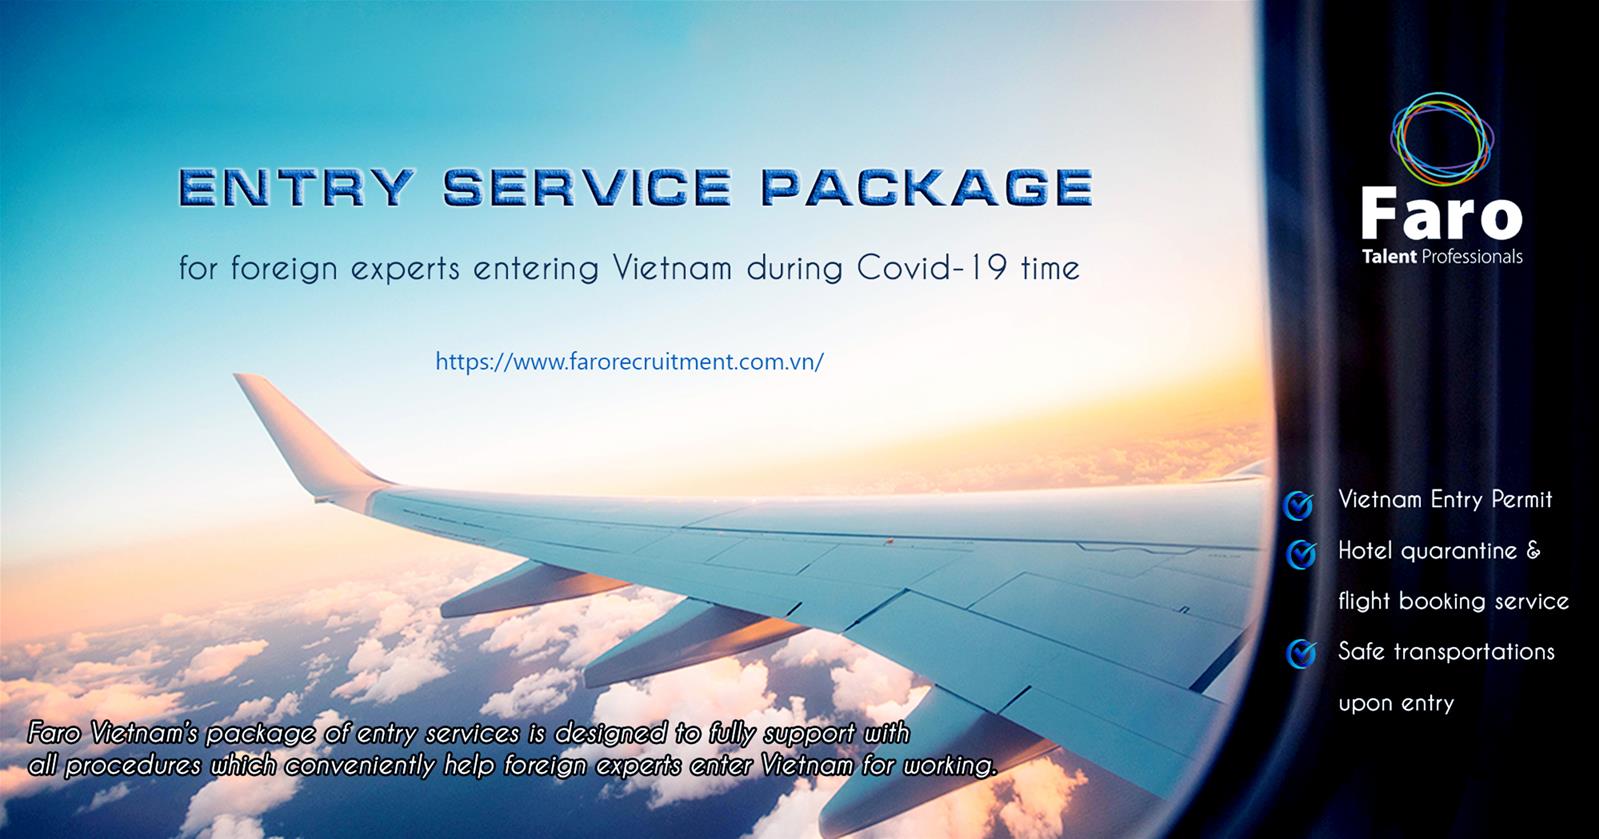 Entry service package for foreign experts entering Vietnam during Covid-19 time